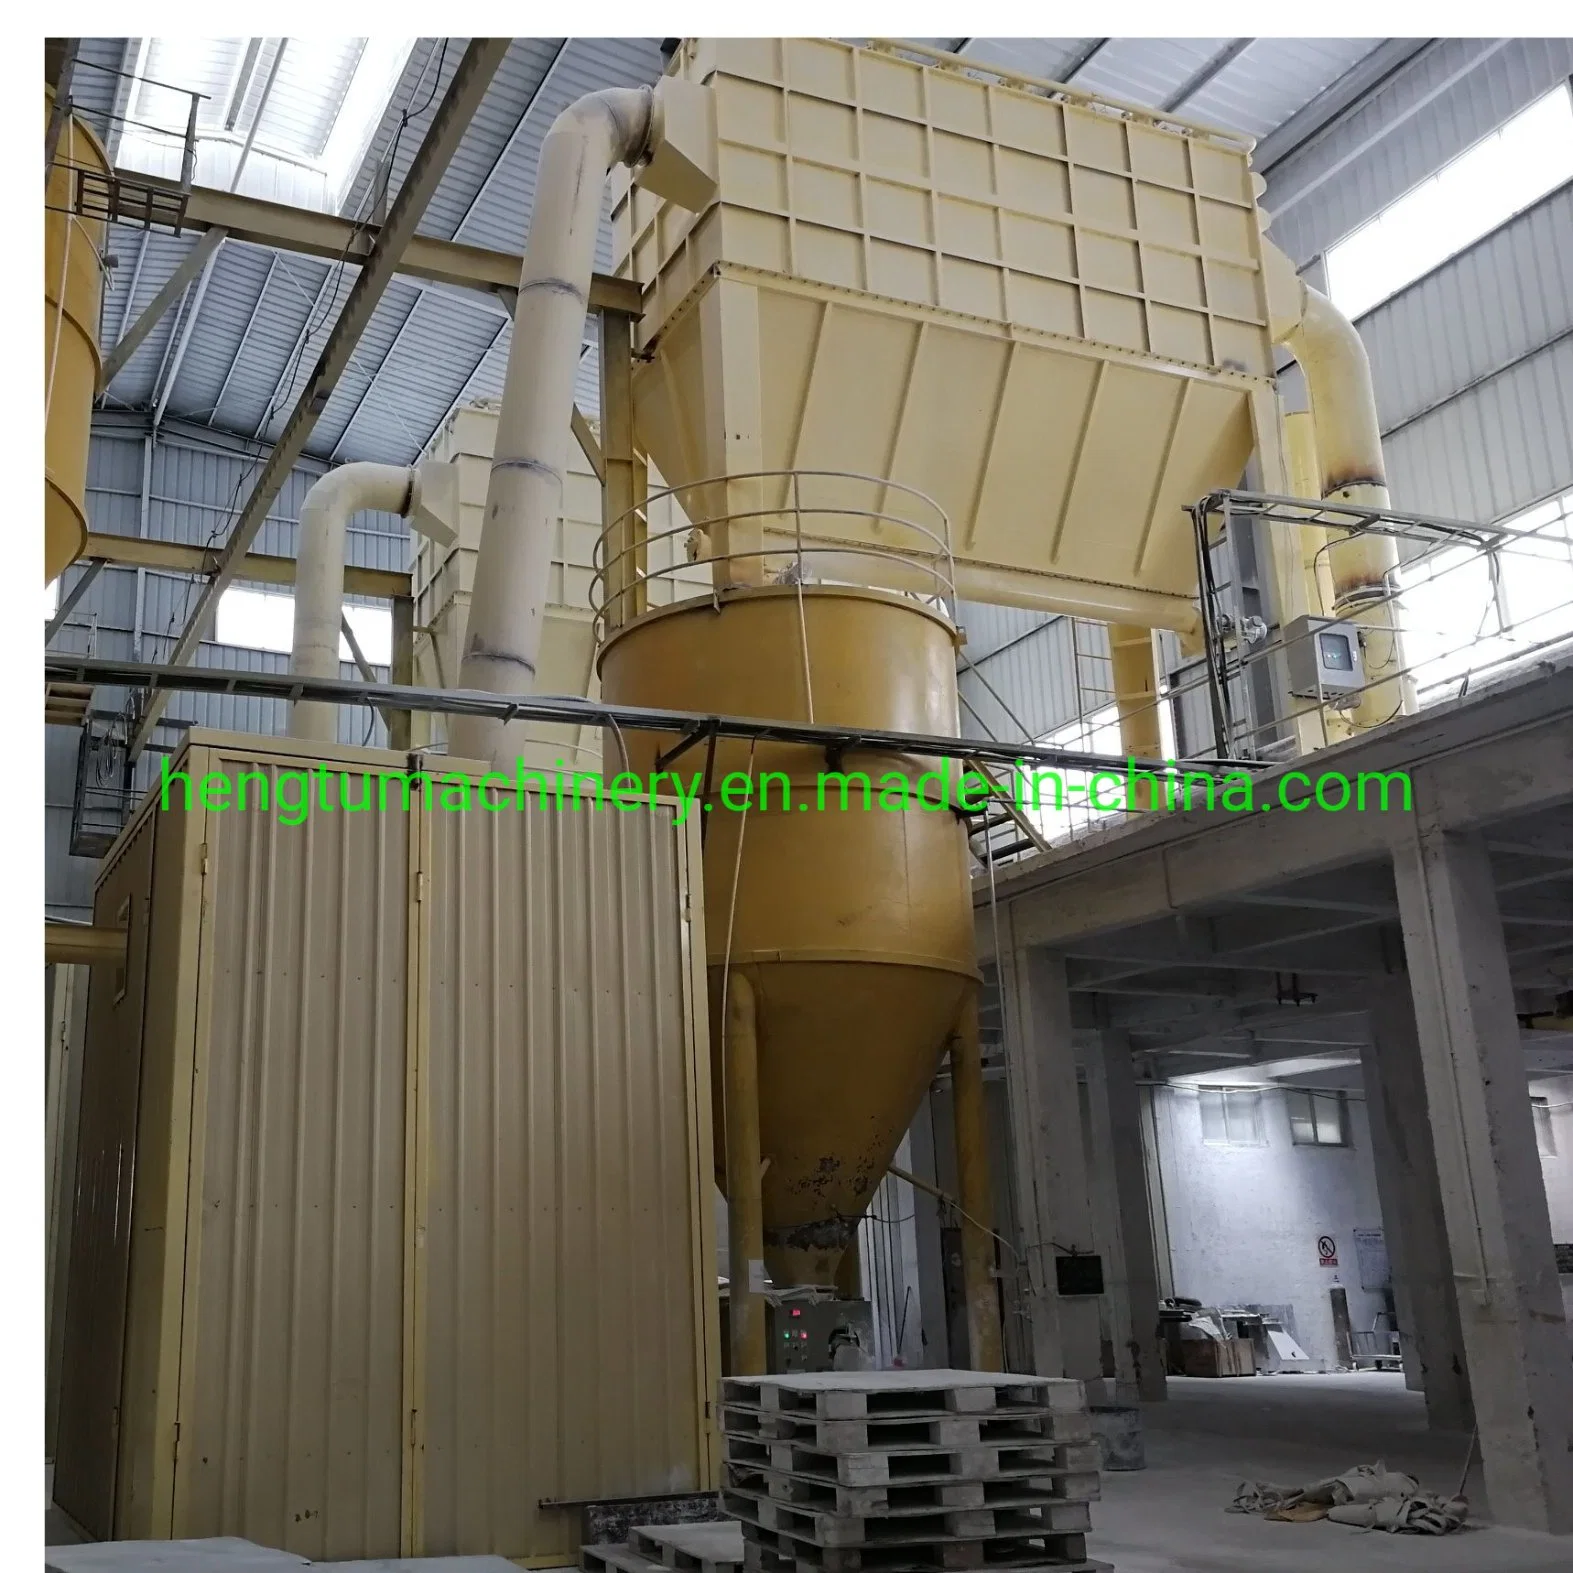 Calcium Carbonate Powder Grinding Mill Roller Grinding Mill